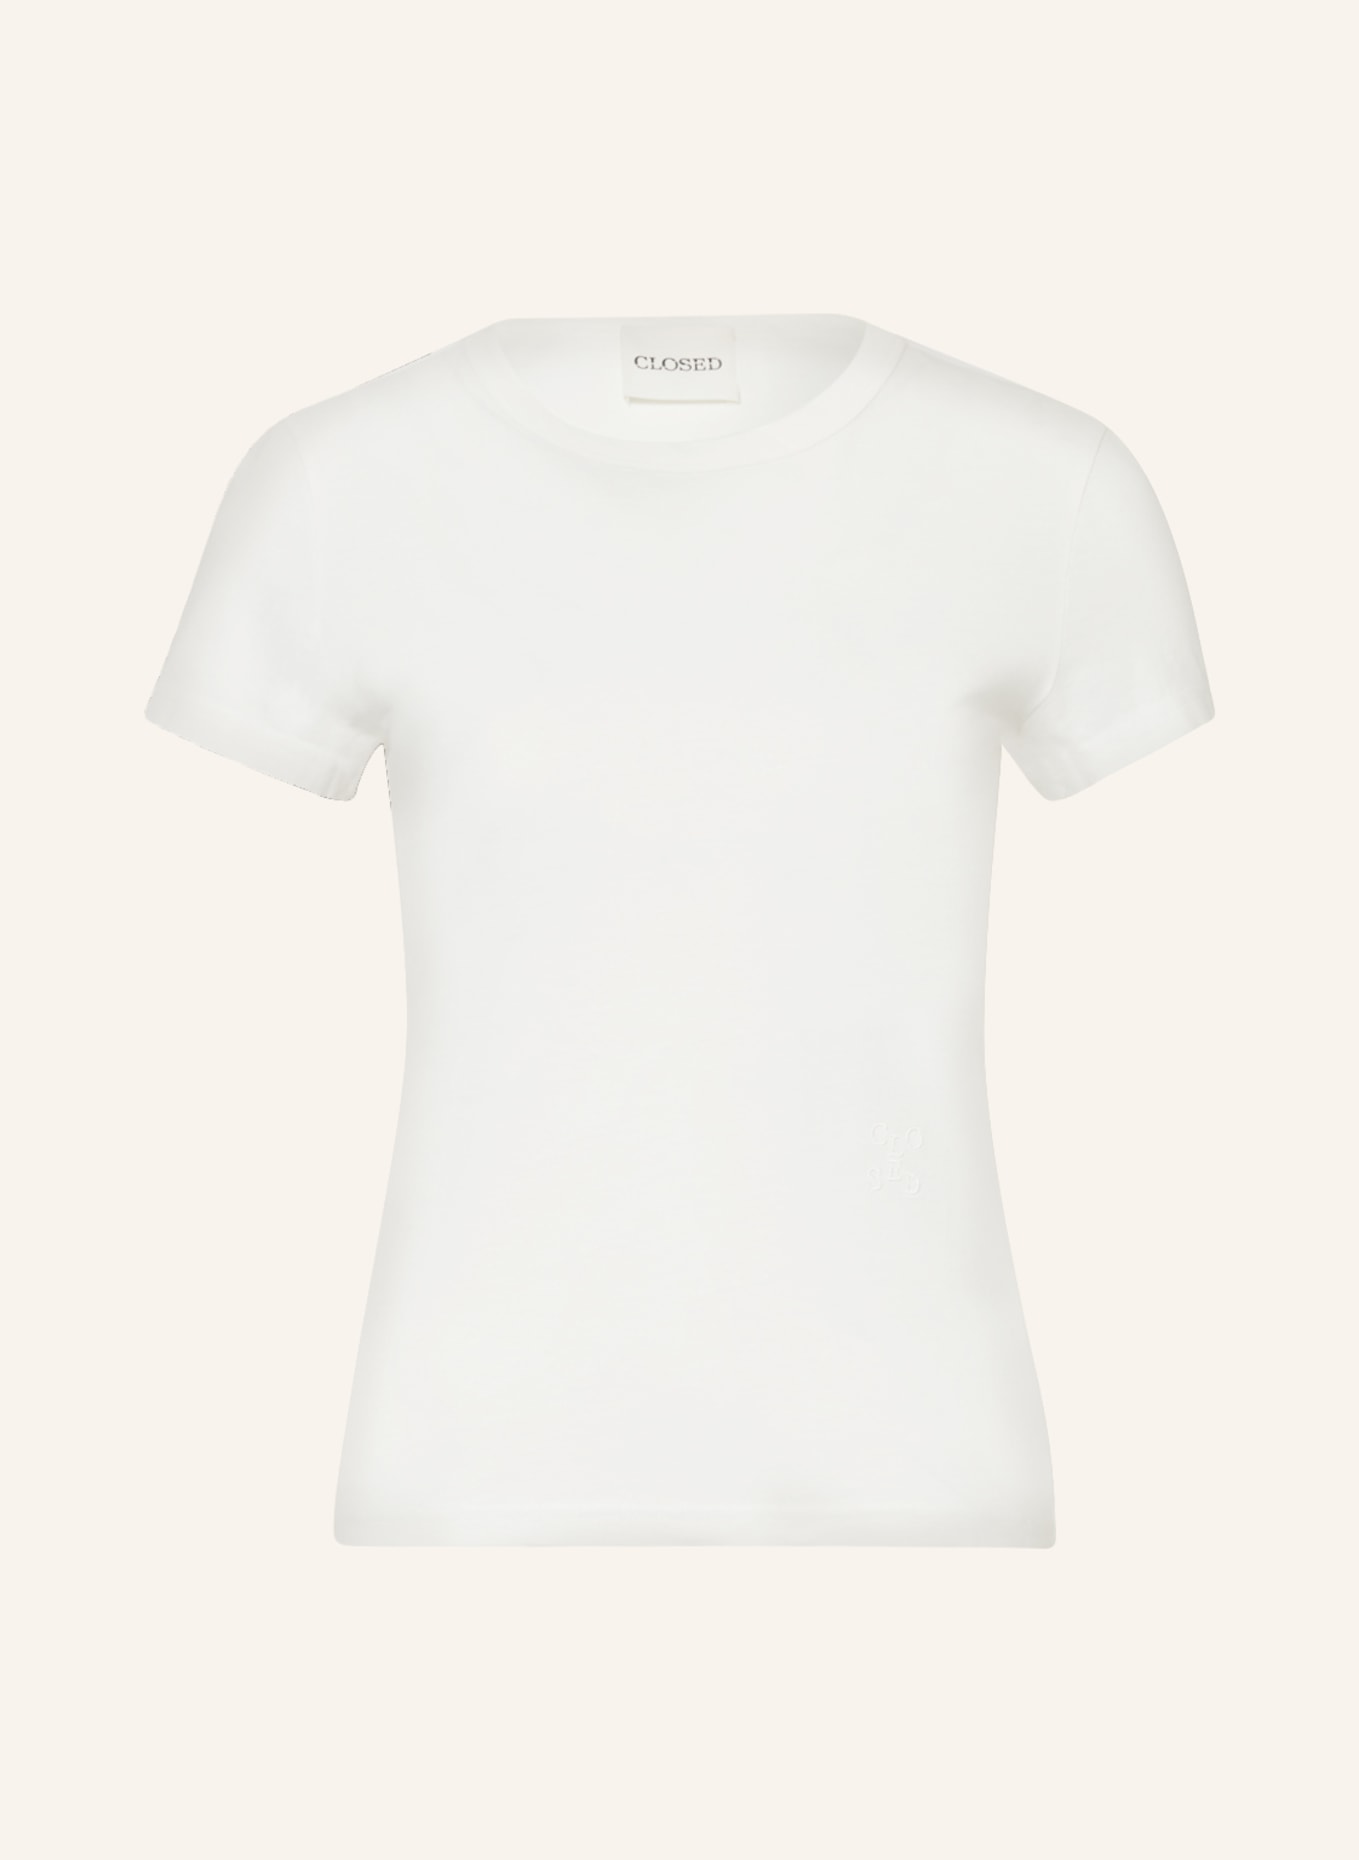 CLOSED T-shirt, Color: WHITE (Image 1)